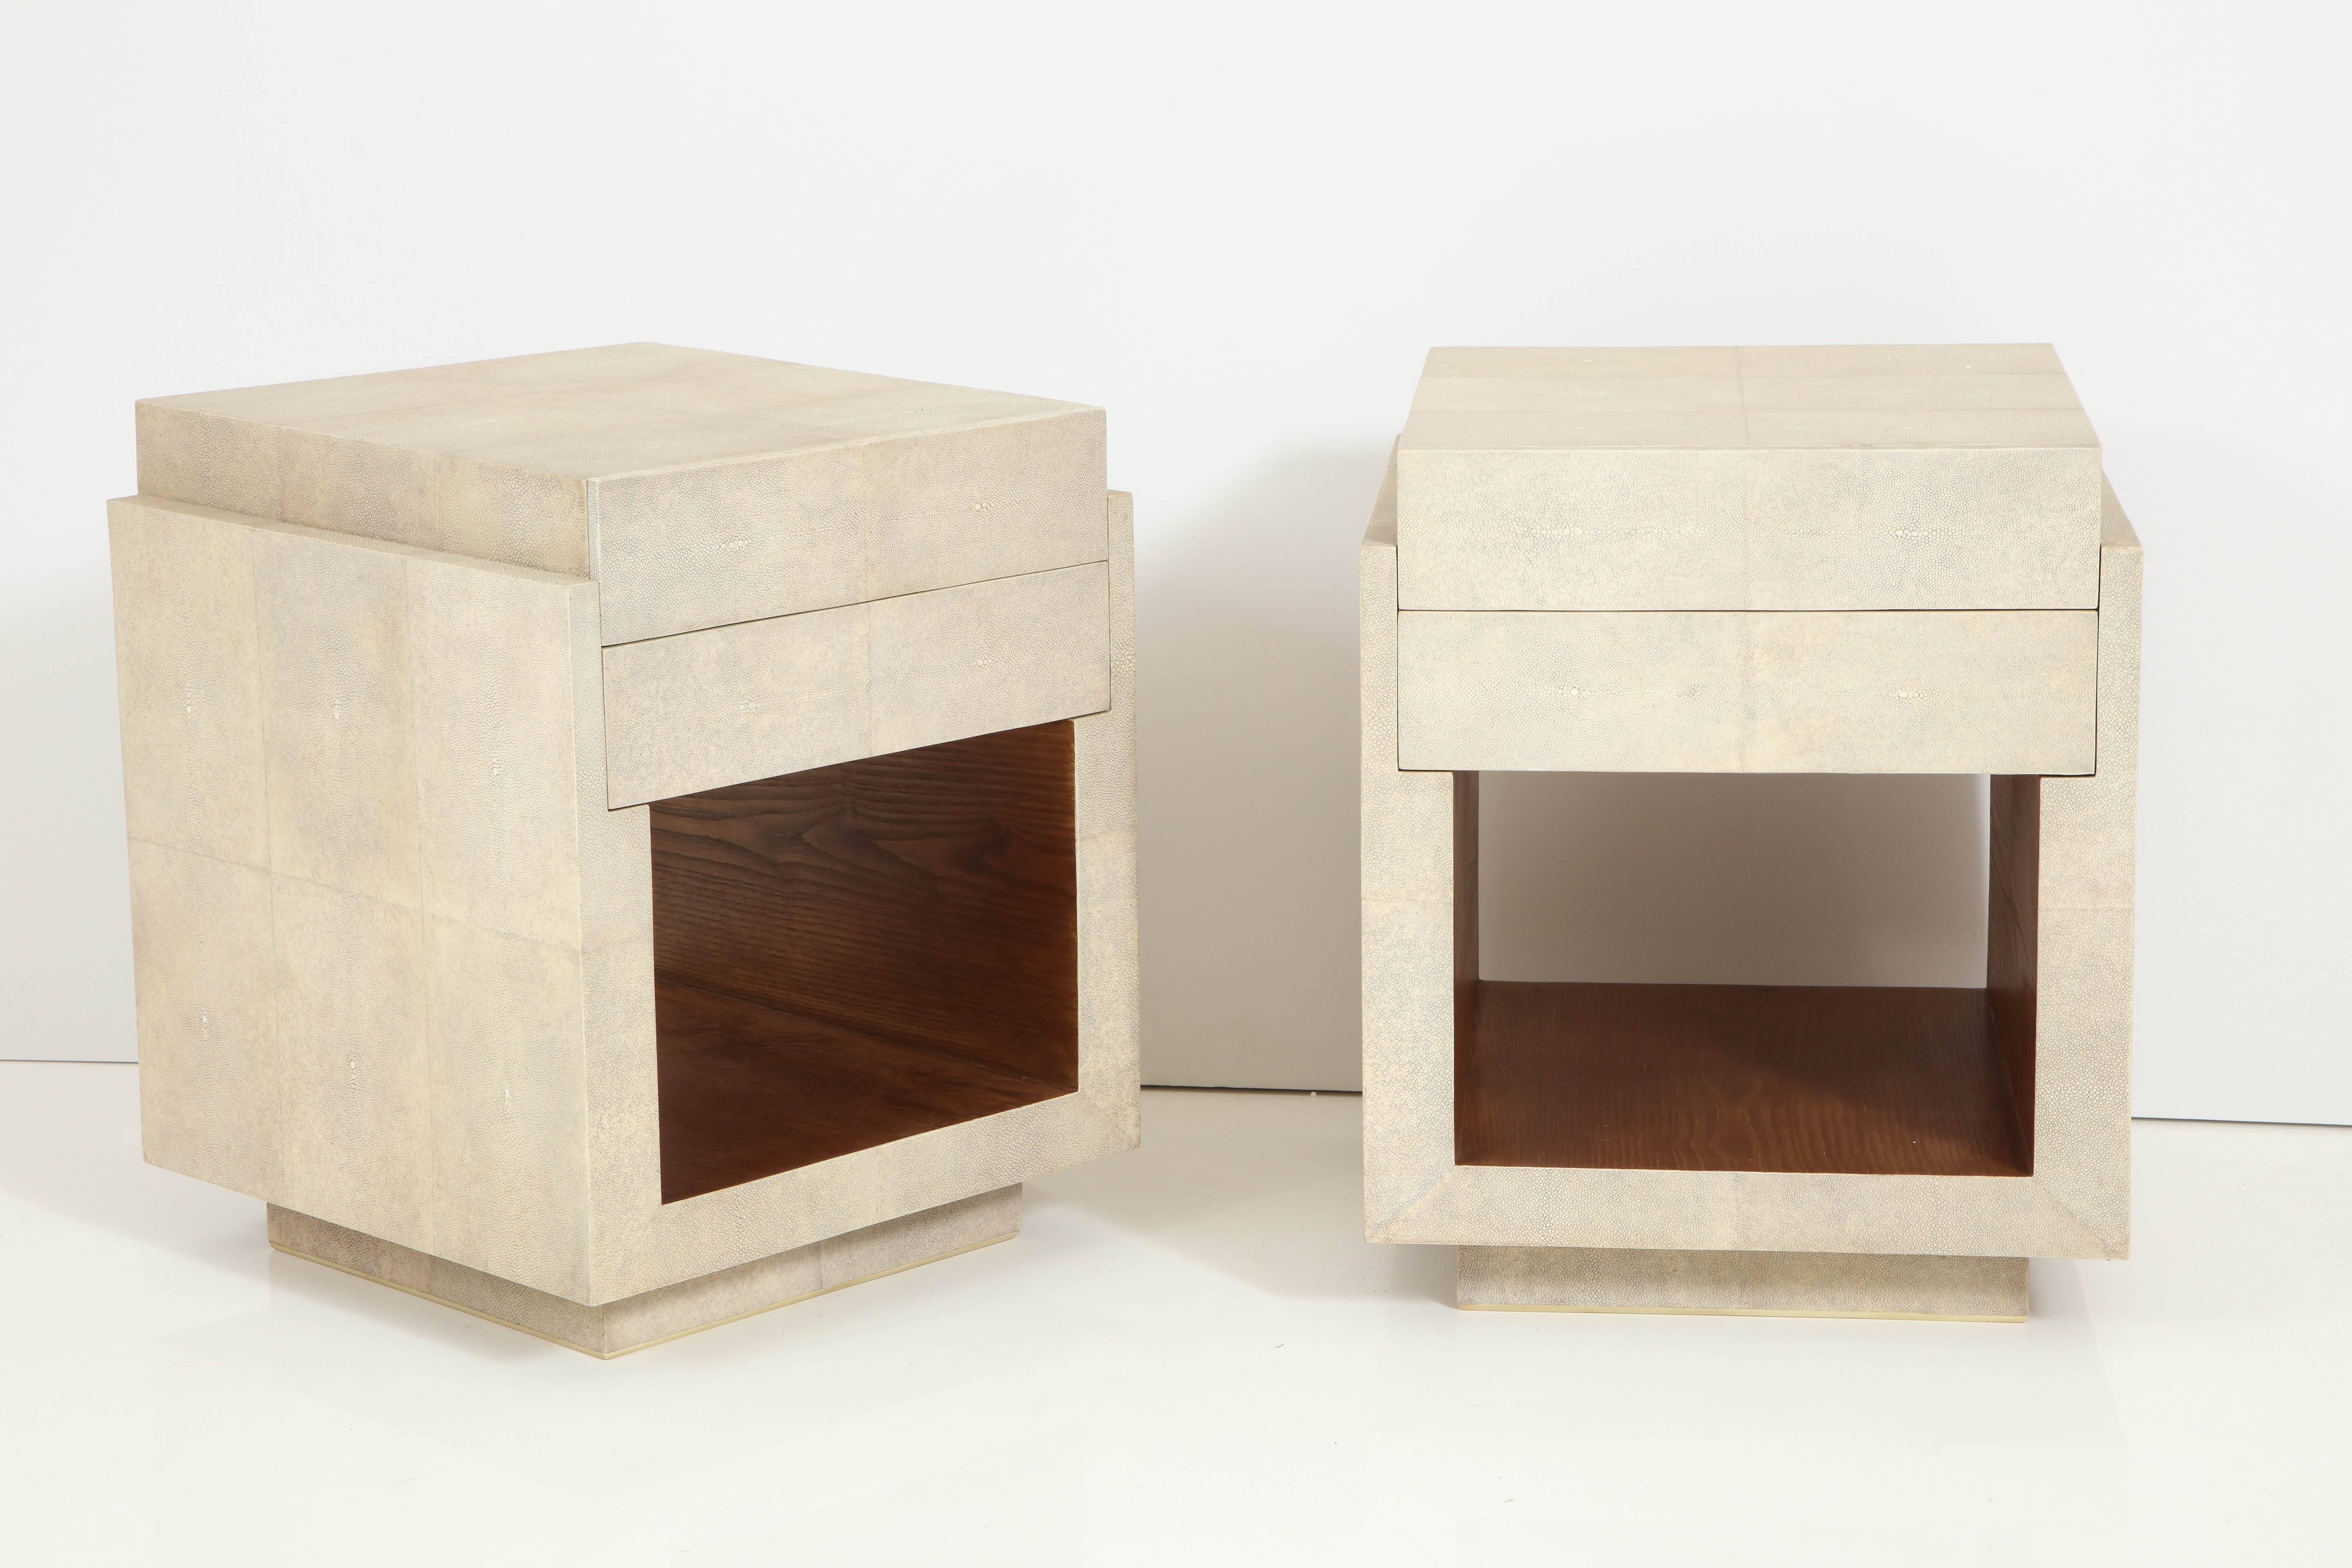 Decorative shagreen bedside tables or side tables with two drawers. The side tables have palm wood inside the opening. 
Shagreen is made of stingray, a very beautiful material. They can also be ordered in different colors shagreen, antique black,